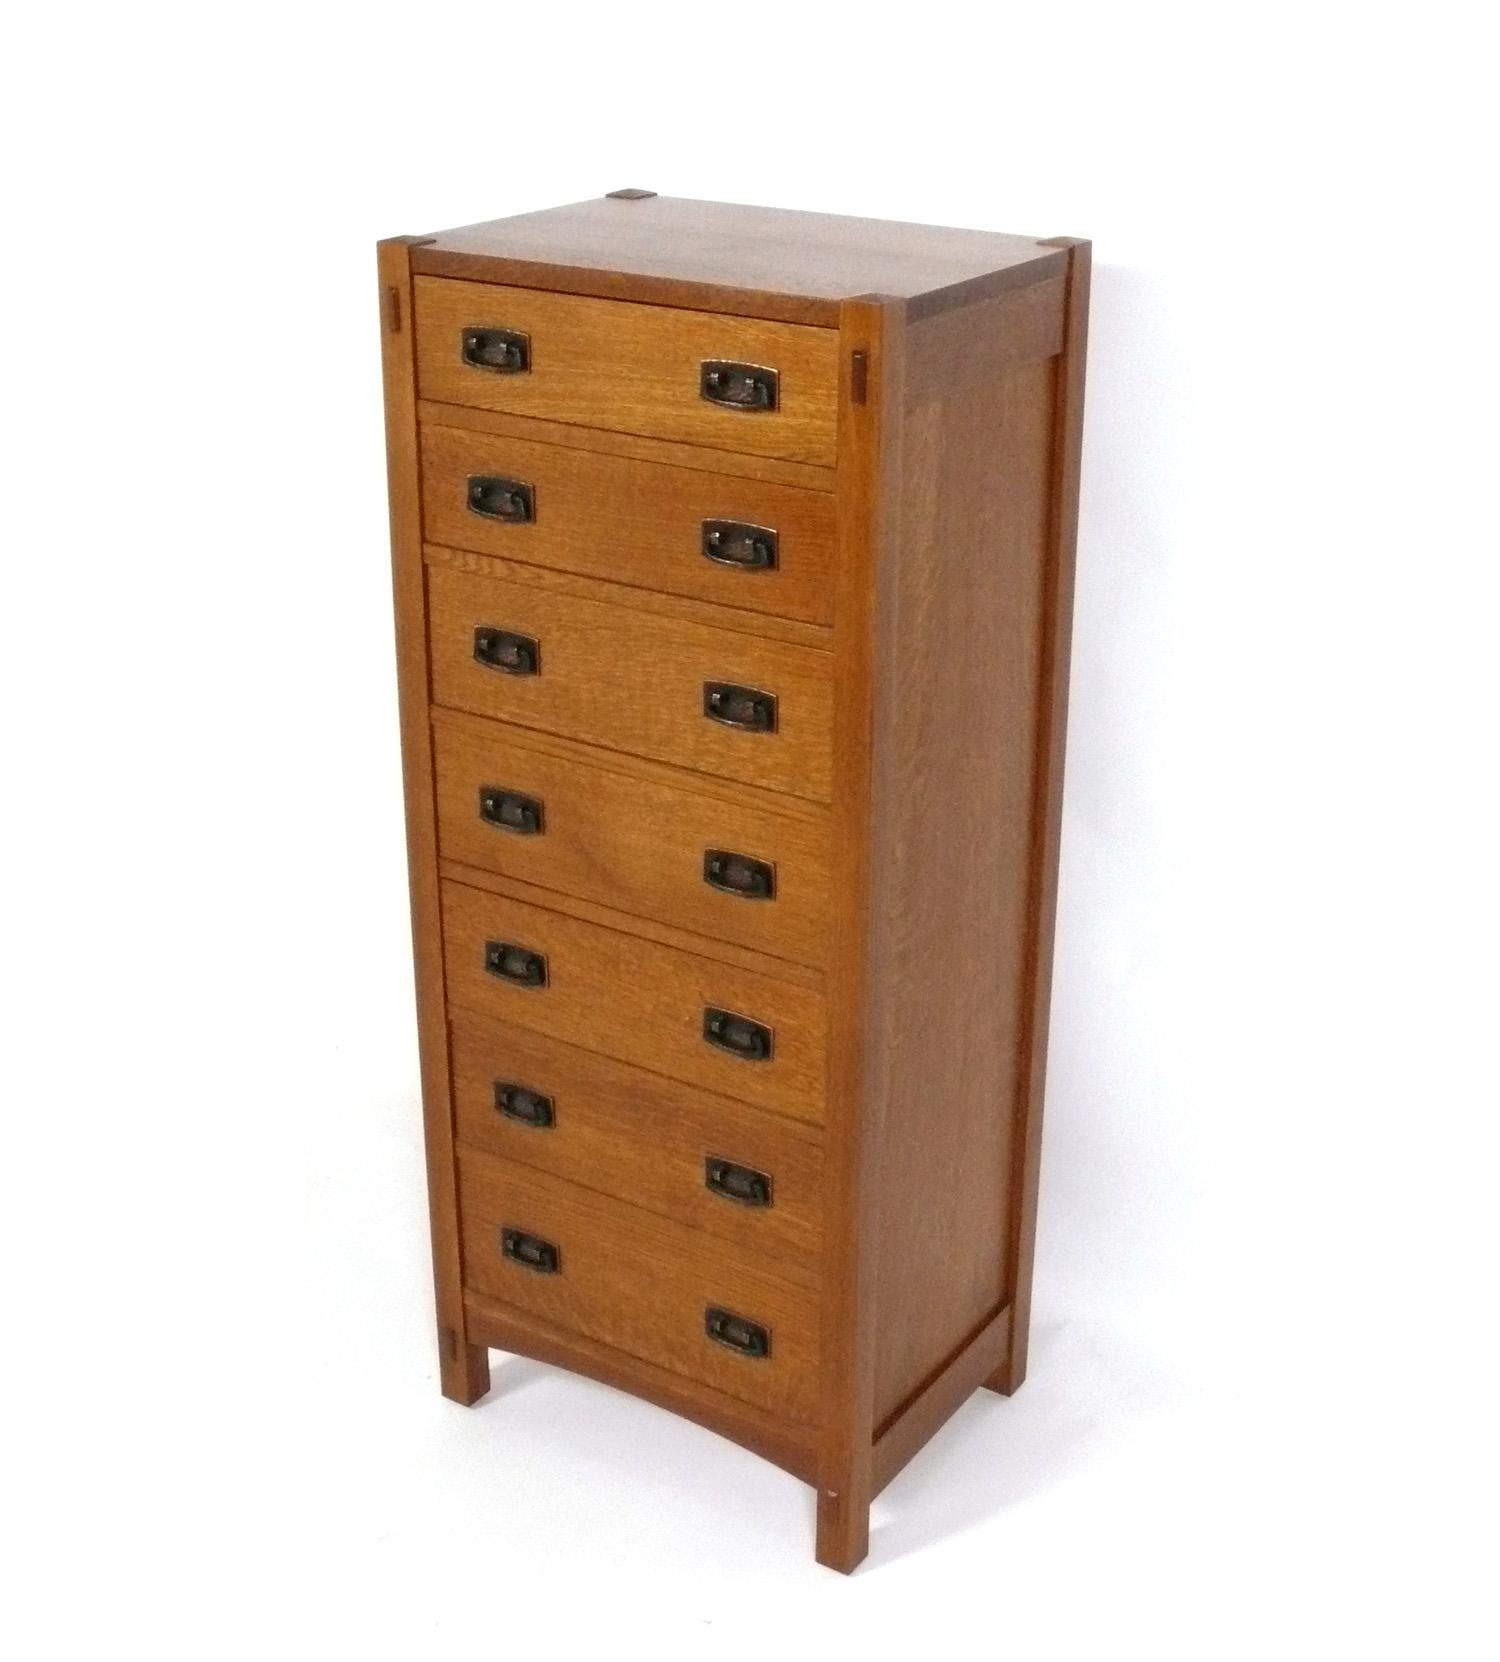 Clean Lined Stickley Lingerie Chest or Semainier, originally designed in the 1910s by Gustav Stickley, this example is part of the authorized line produced by Stickley in the 2000s. Like all Stickley furniture, this piece is extremely well made with